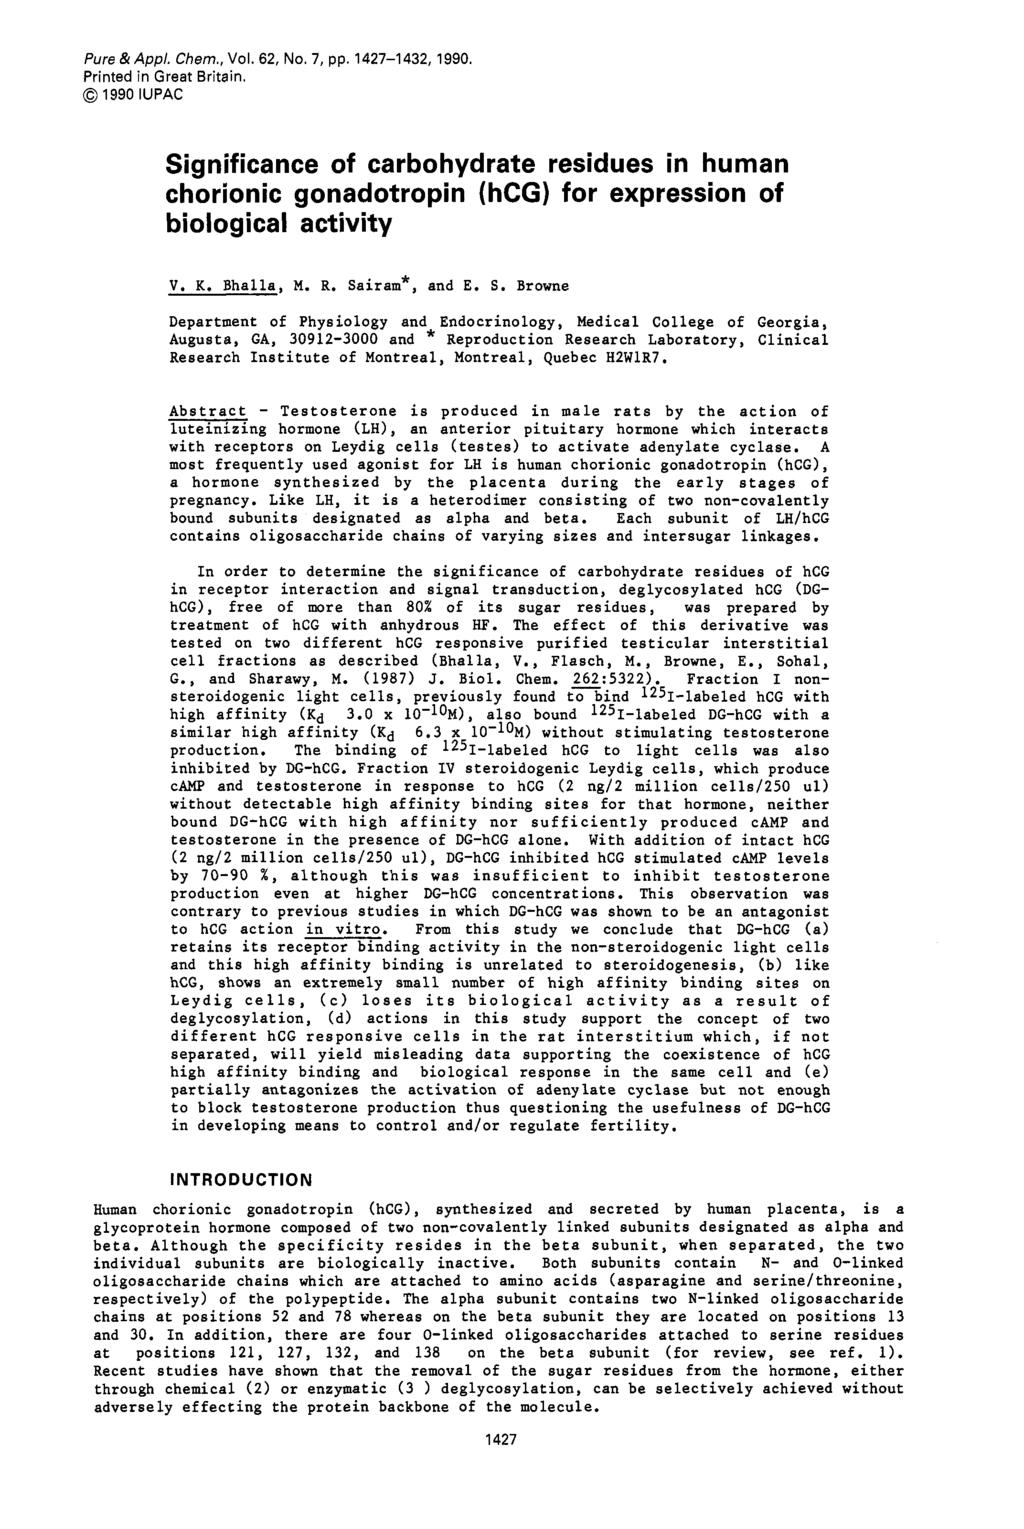 Pure & Appl. Chem., Vol. 62, No. 7, pp. 1427-1432,1990. Printed in Great Britain.